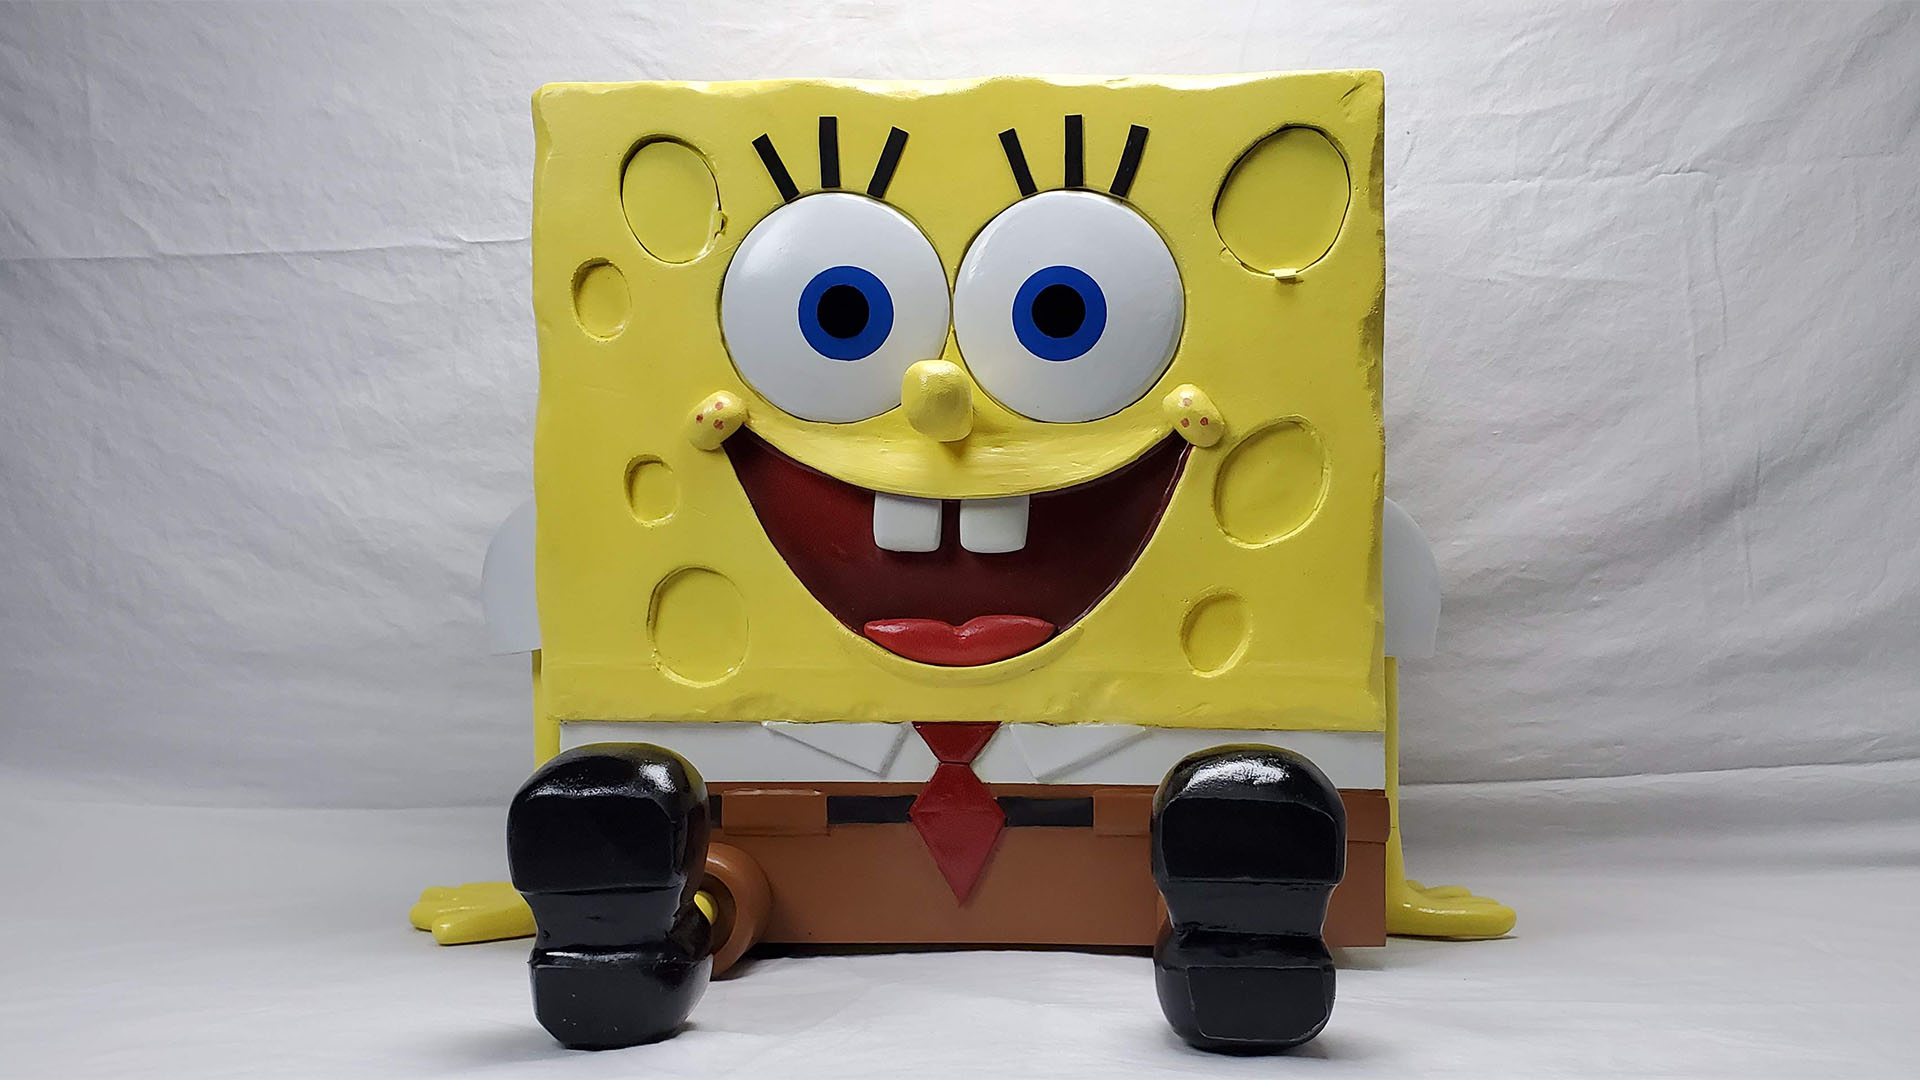 This SpongeBob SquarePants gaming PC was made from cosplay materials